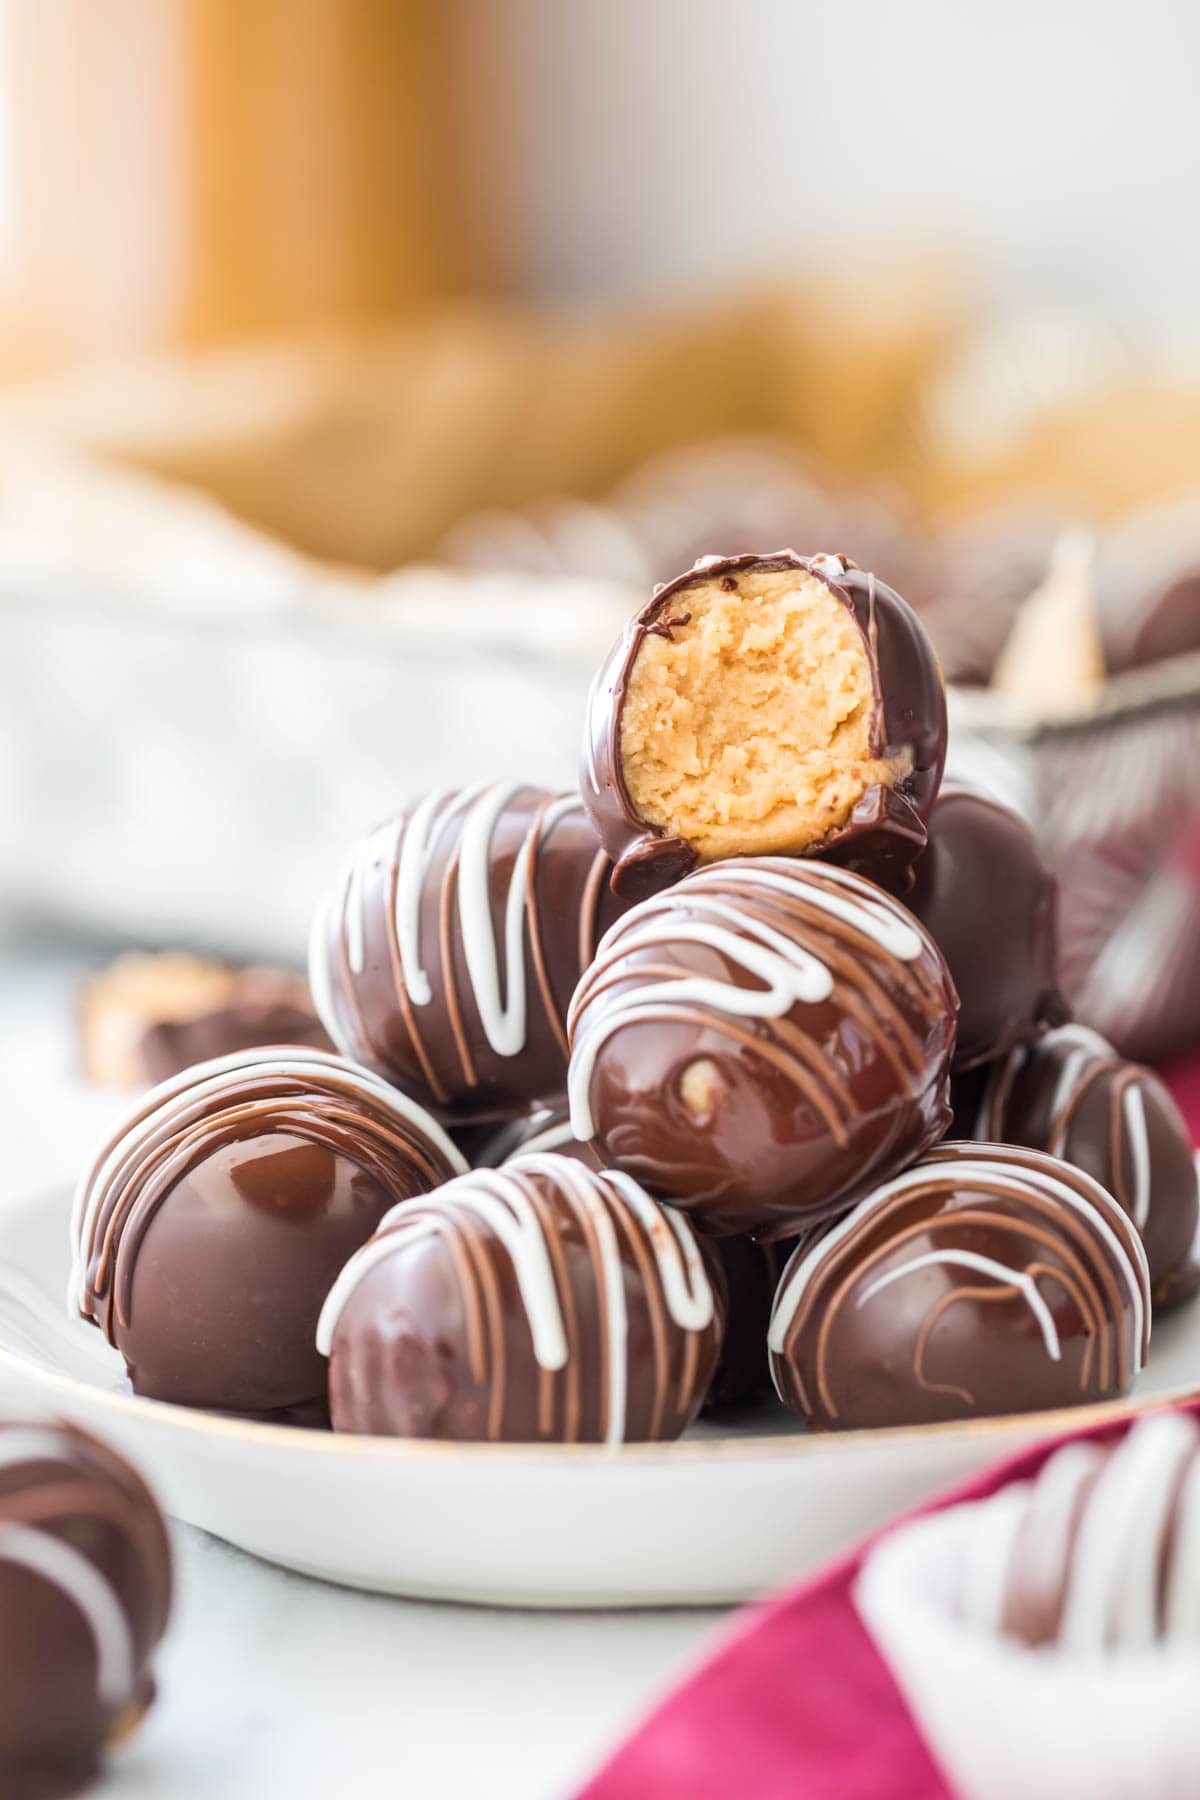 shiny chocolate coated peanut butter balls stacked on plate, with top ball missing a bite to show peanut butter center